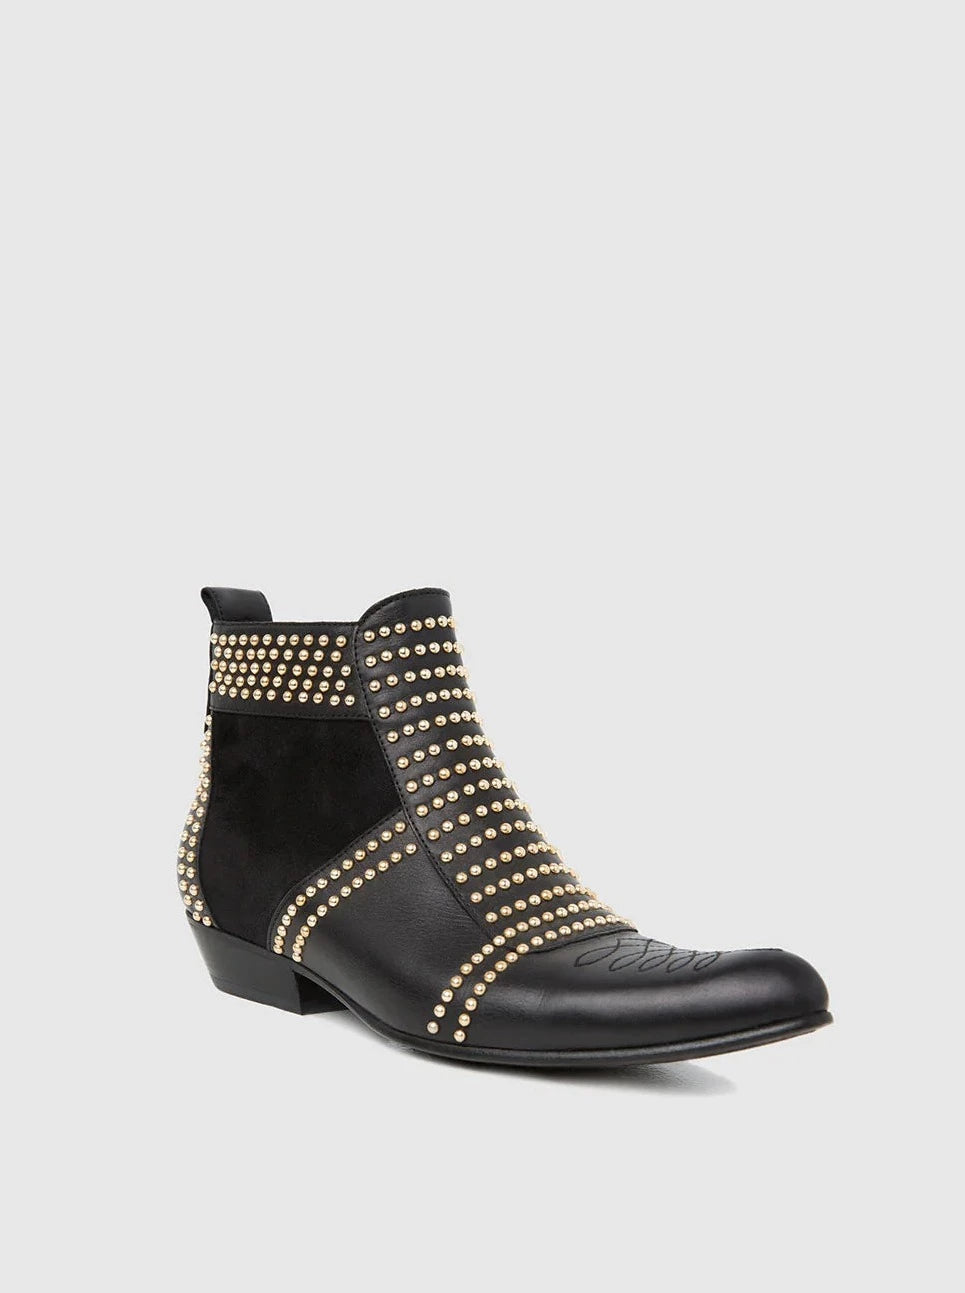 Charlie boots, gold studs